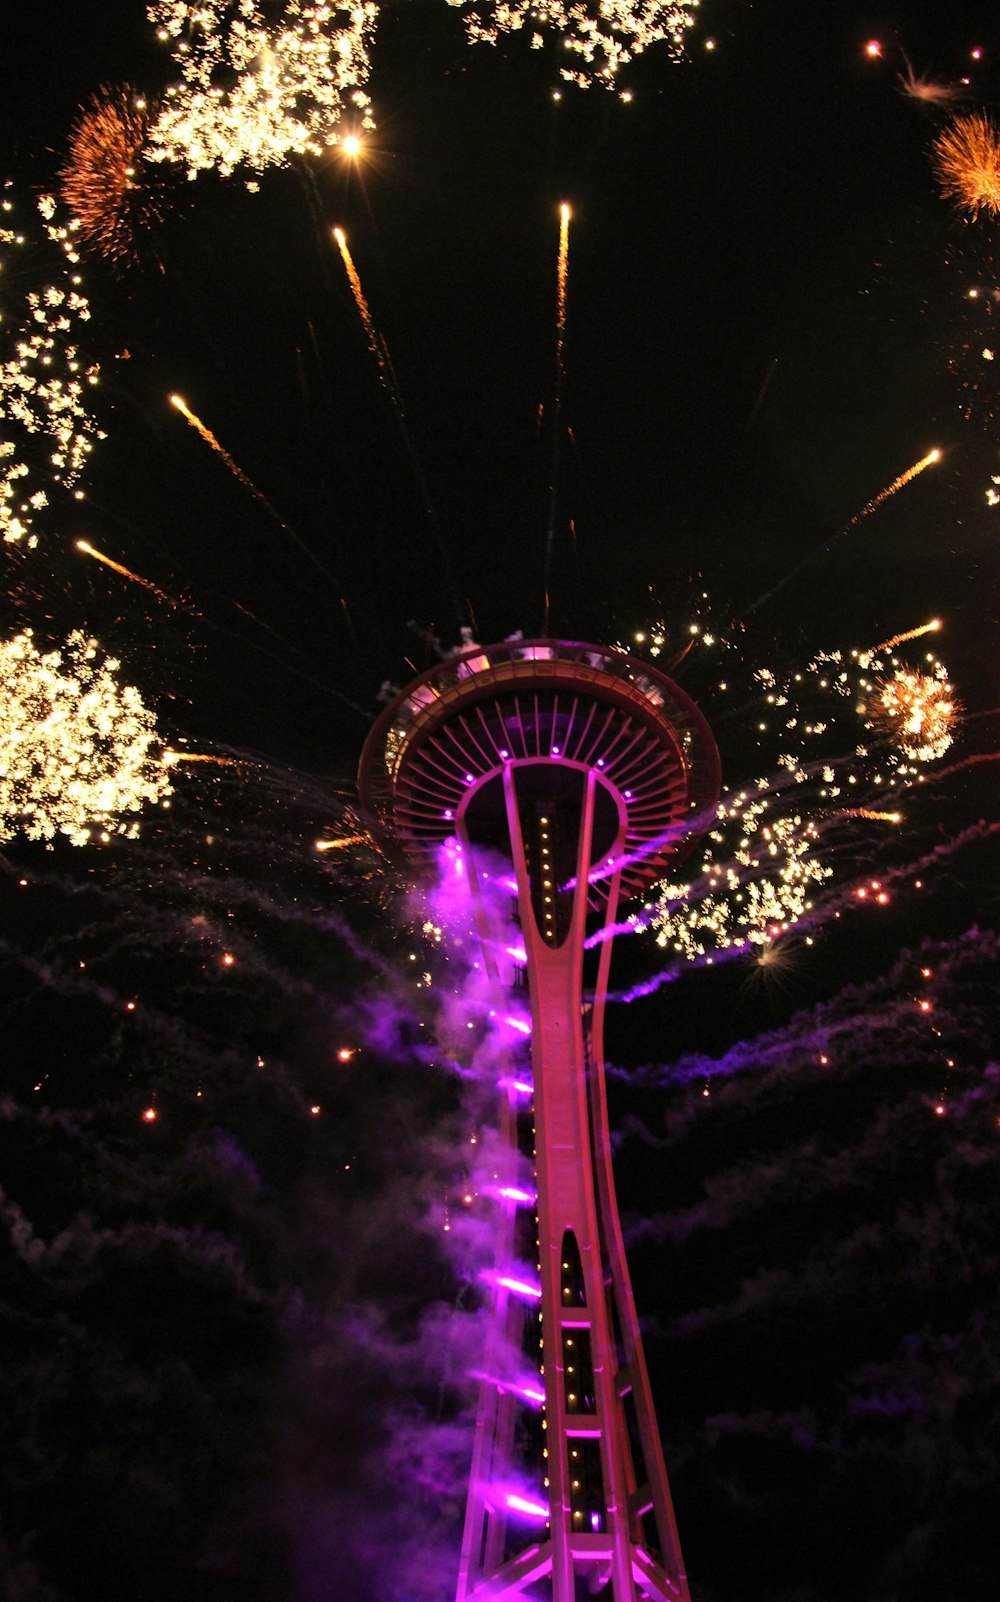 fireworks are lit up in the sky above the space needle